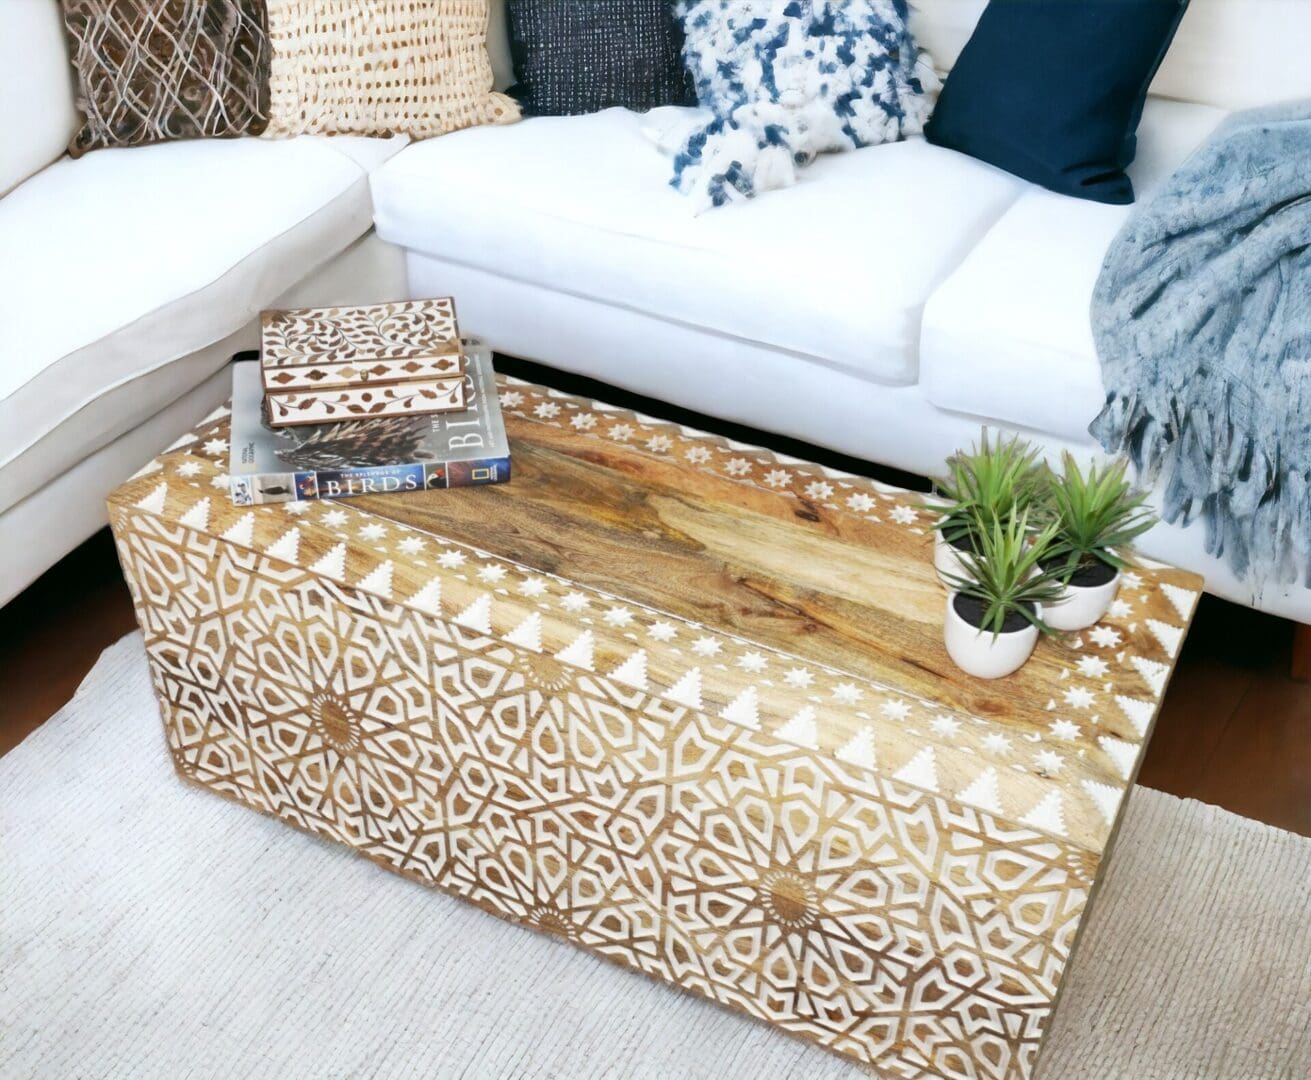 Hand-crafted natural wood coffee table made of mango wood with hand carved details in white, staged in a living room.